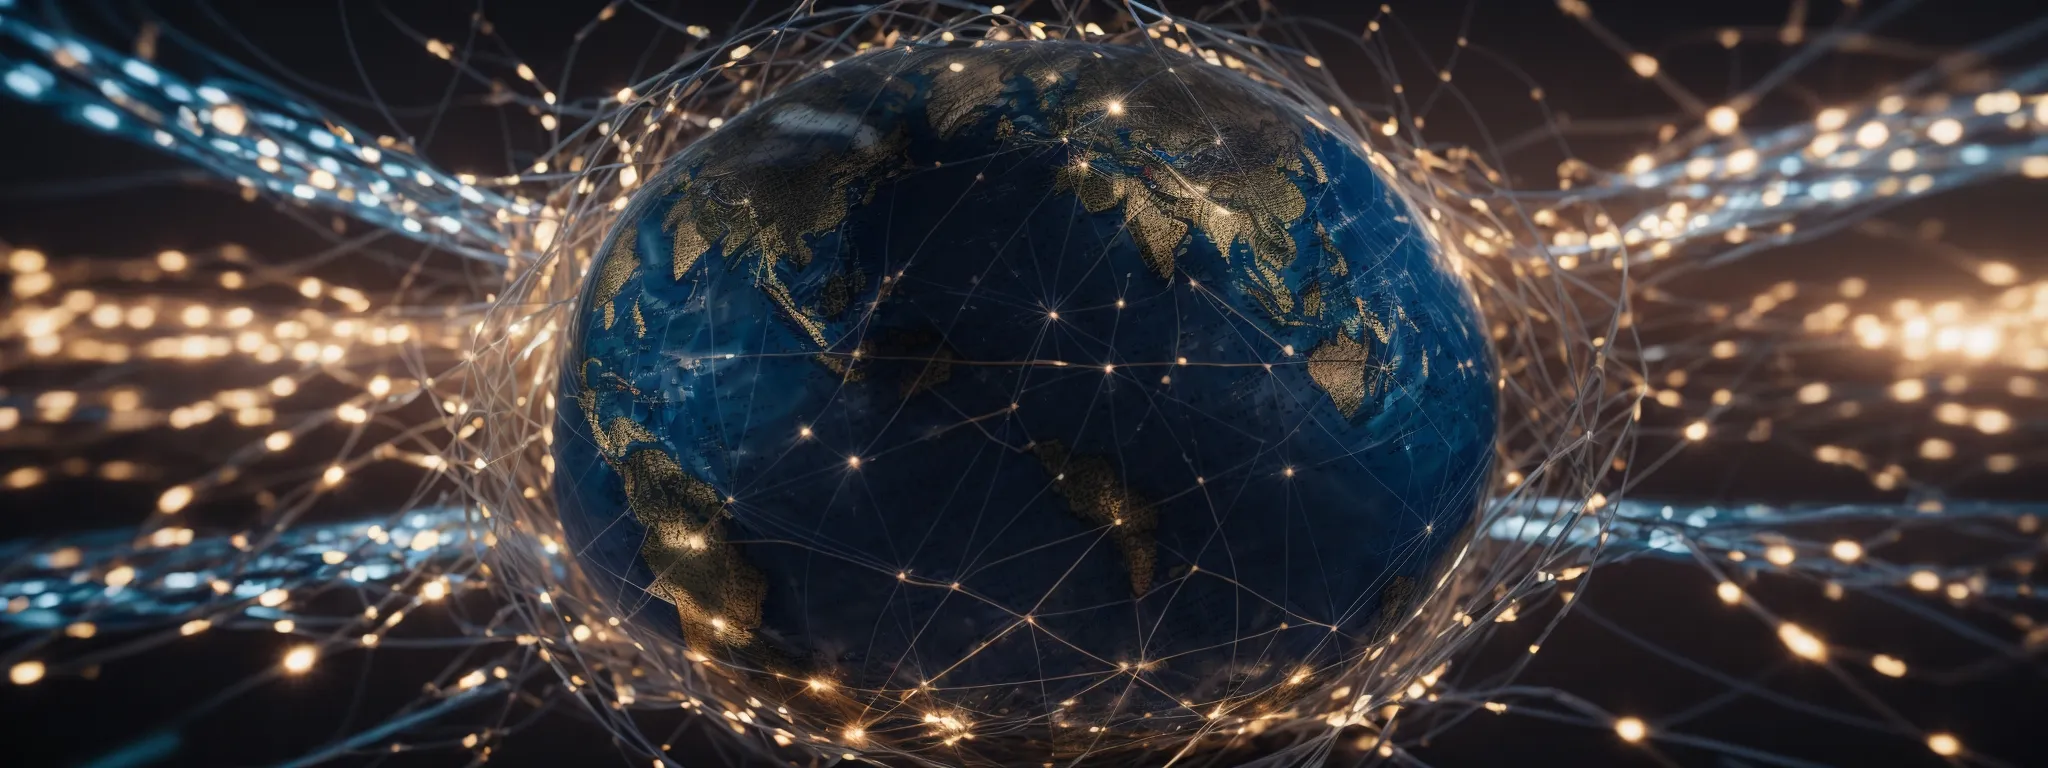 a digitized globe surrounded by a network of light, representing innovation and global connectivity in the digital age.